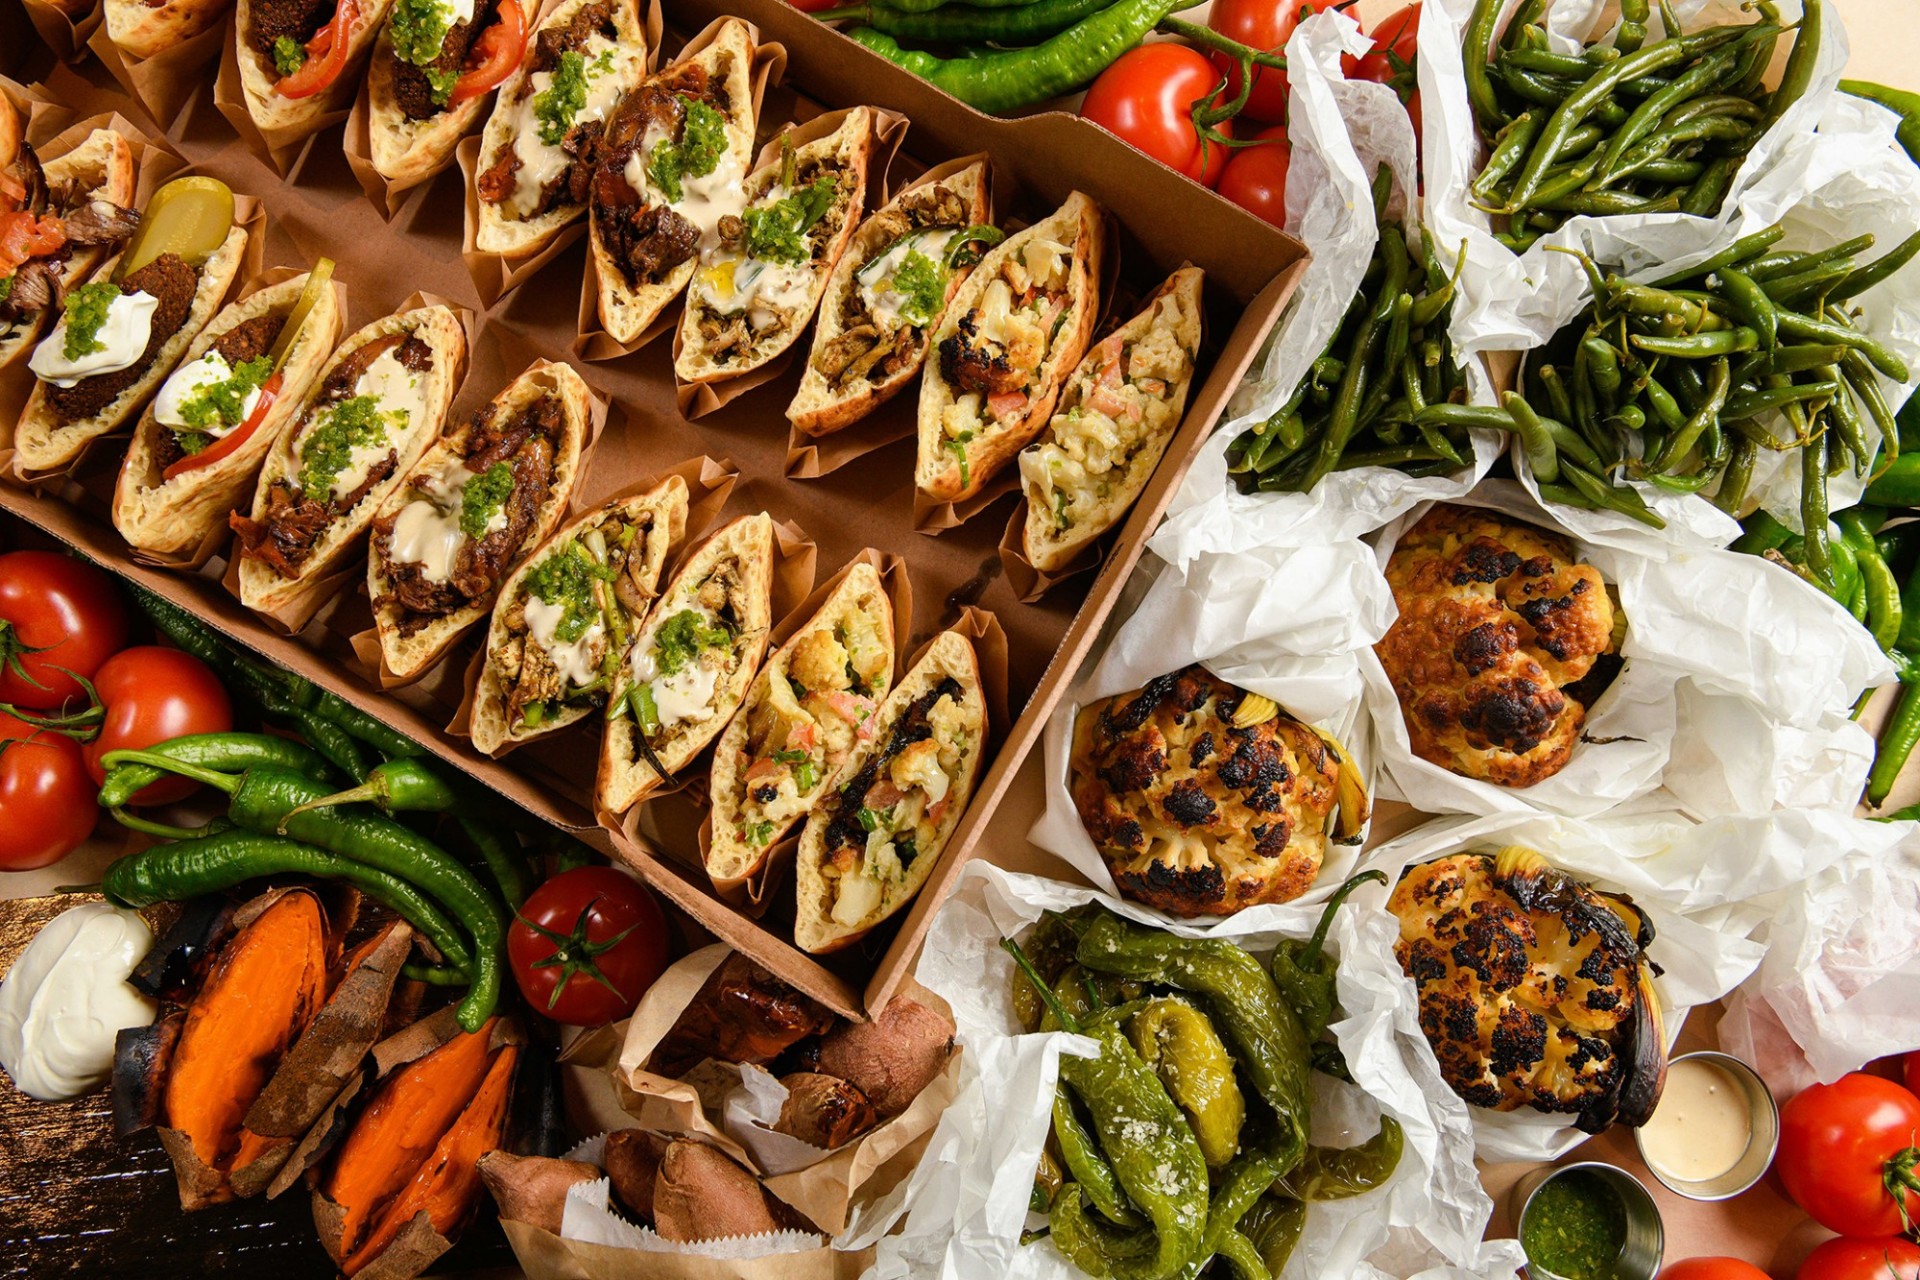 A selection of Miznon catering options, including an assortment of pitas, green beans, peppers, and baby cauliflower.